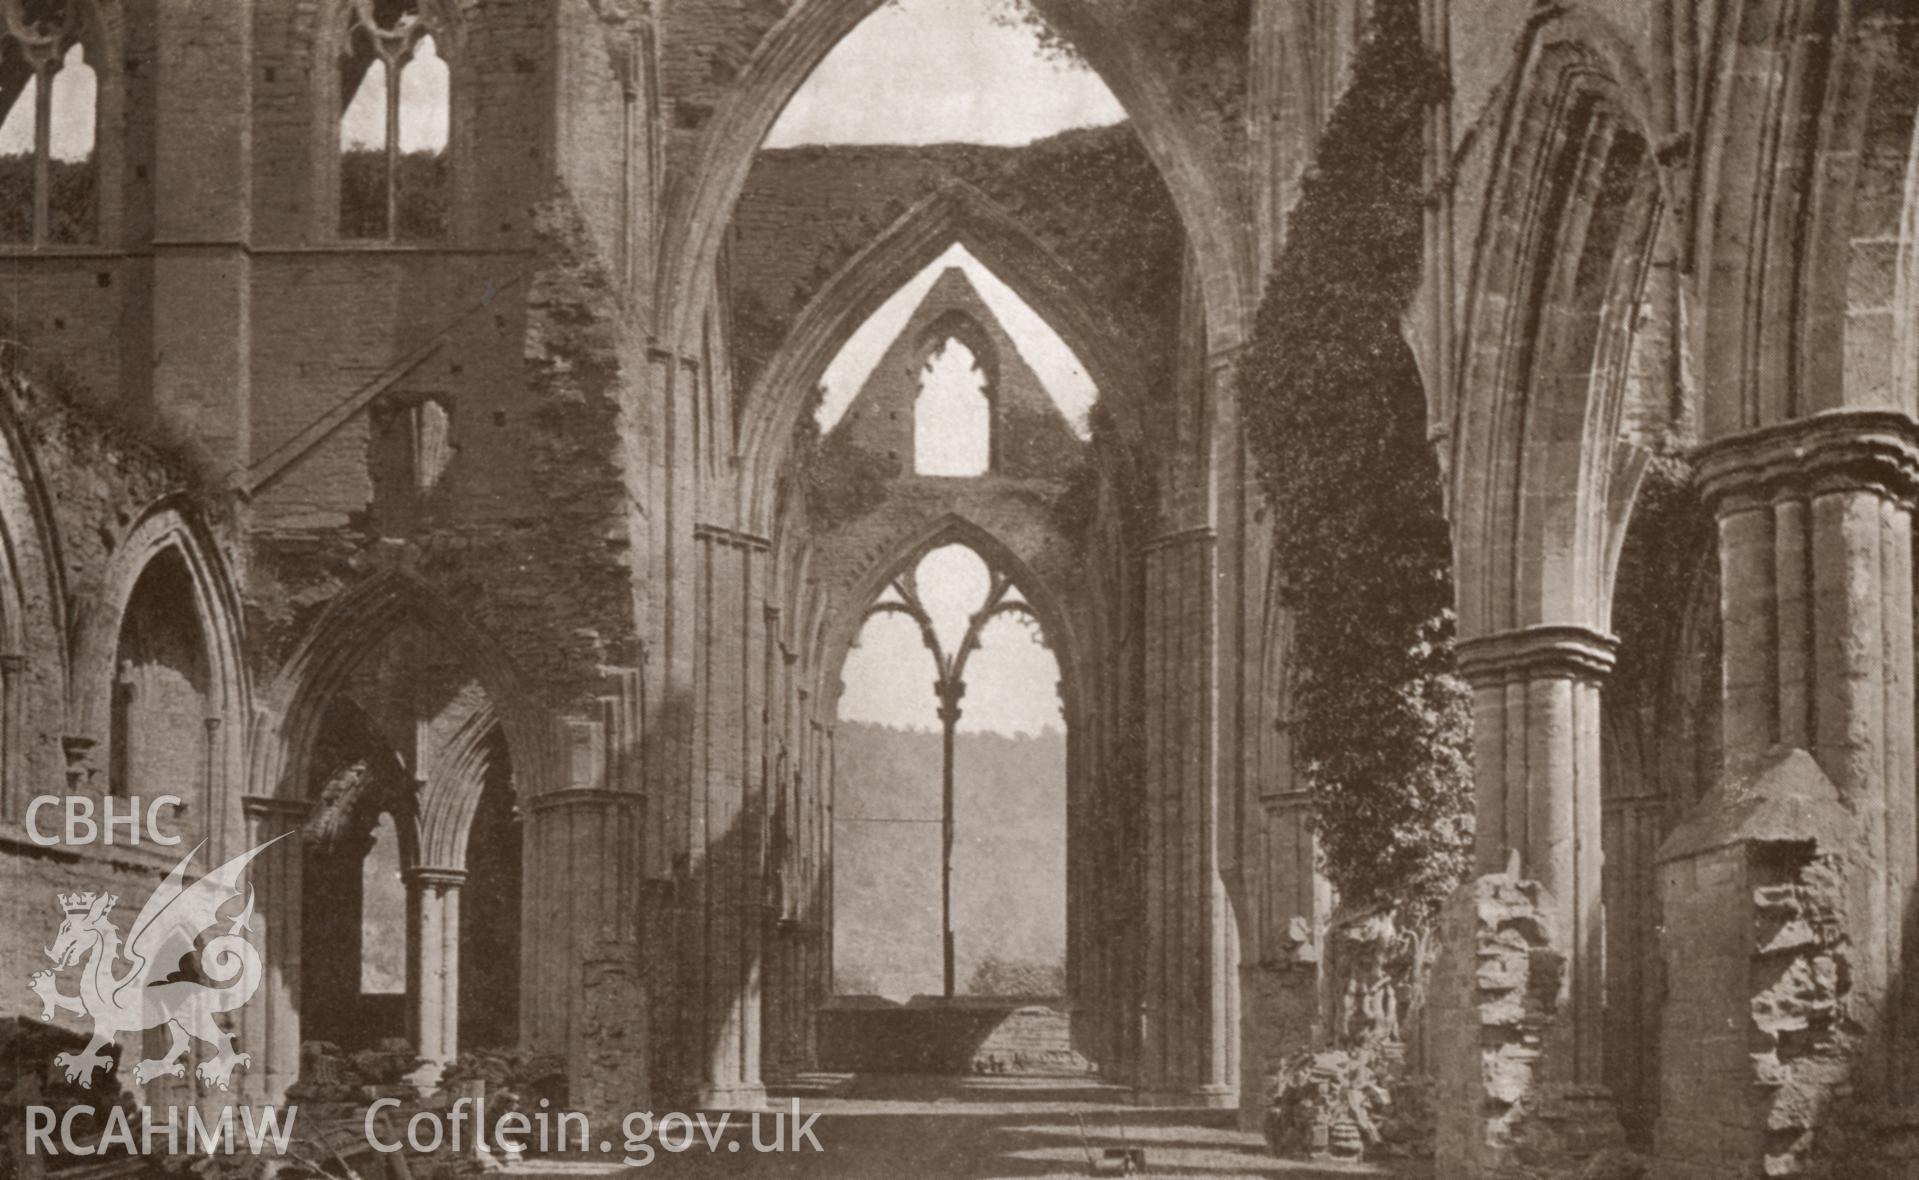 Digital copy of a postcard showing the interior of Tintern Abbey looking east.